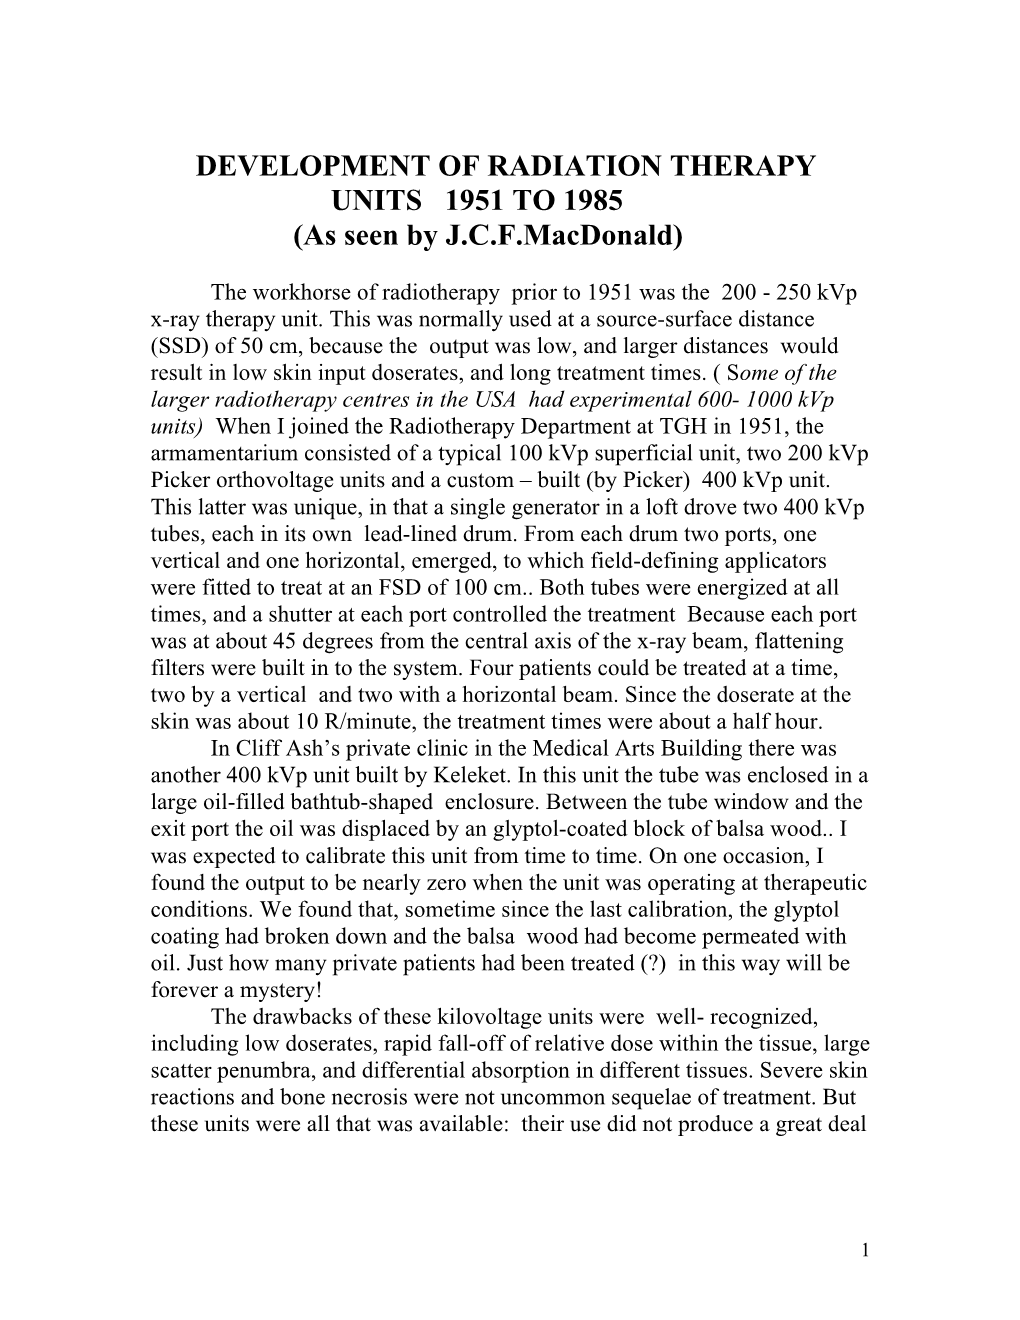 Develpment of Radiation Therapy Units 1951 to 1985